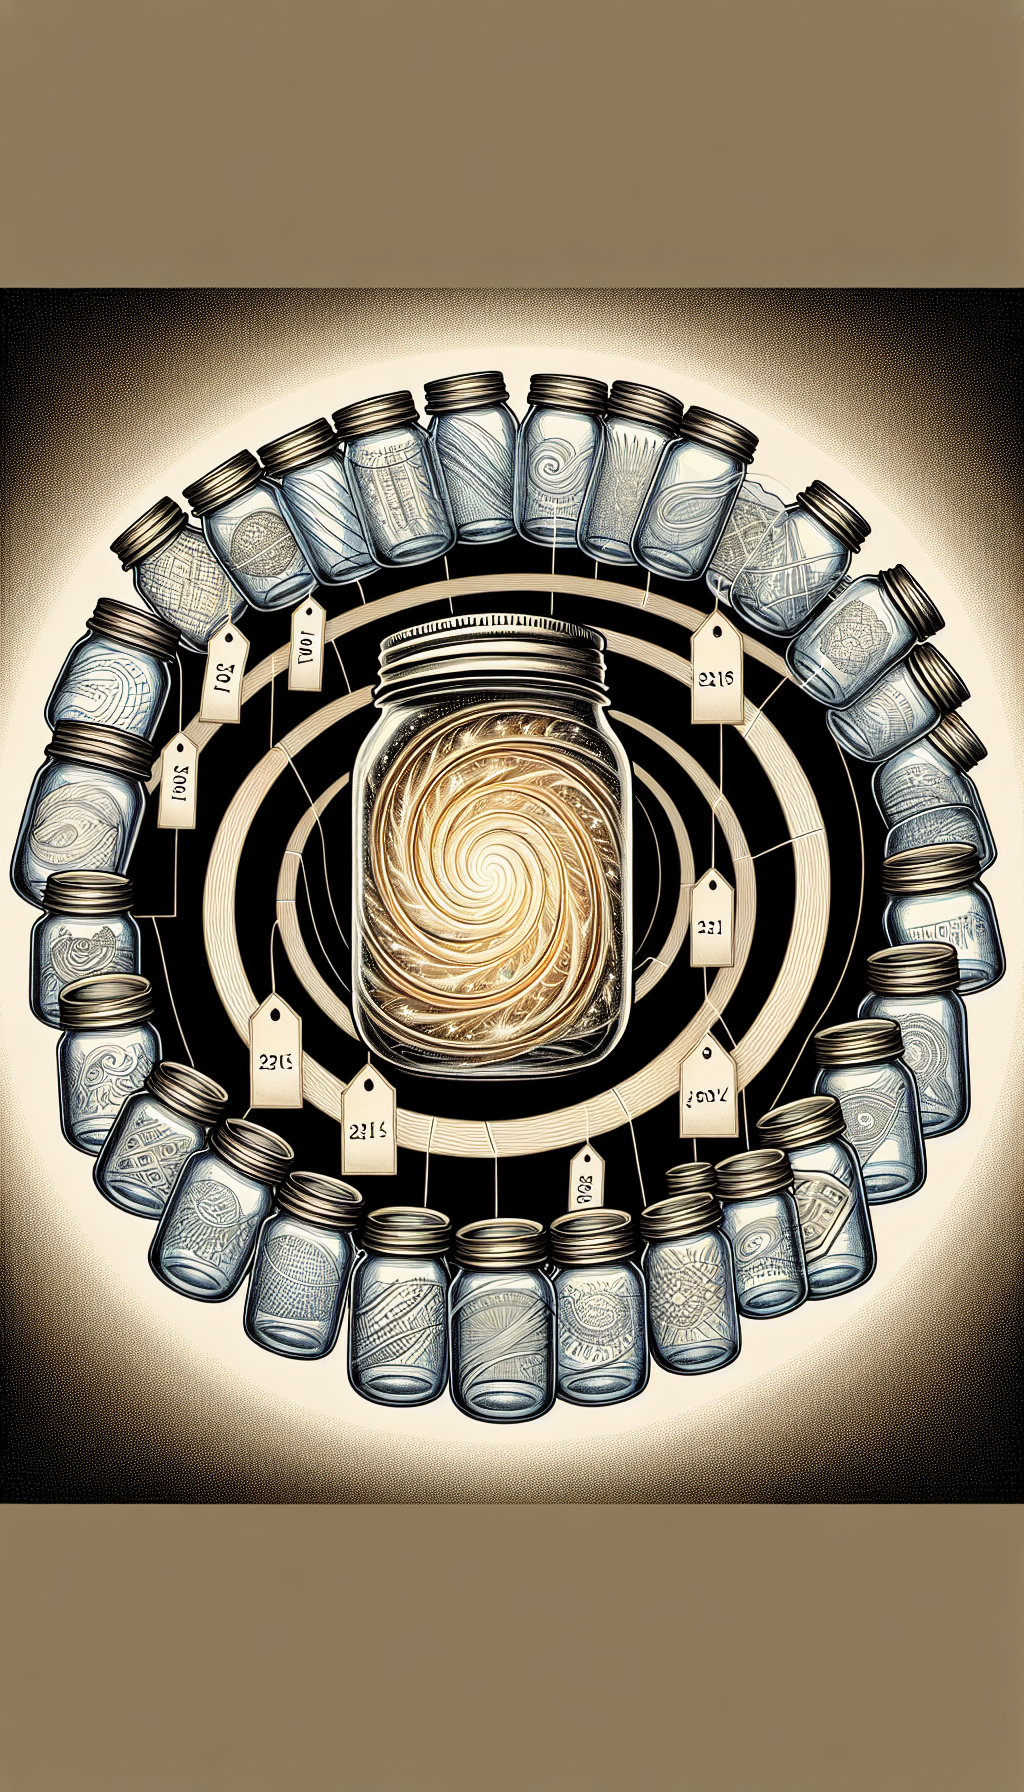 An illustration depicts a spiraling timeline etched into the surface of a large, transparent mason jar that houses progressively older, smaller ancestor jars within, each with distinct etched patterns marking different eras. The outermost jar glimmers with subtle hints of gold, reflecting the high value of antique mason jars, while labels indicating key historical dates adorn the spiral path.